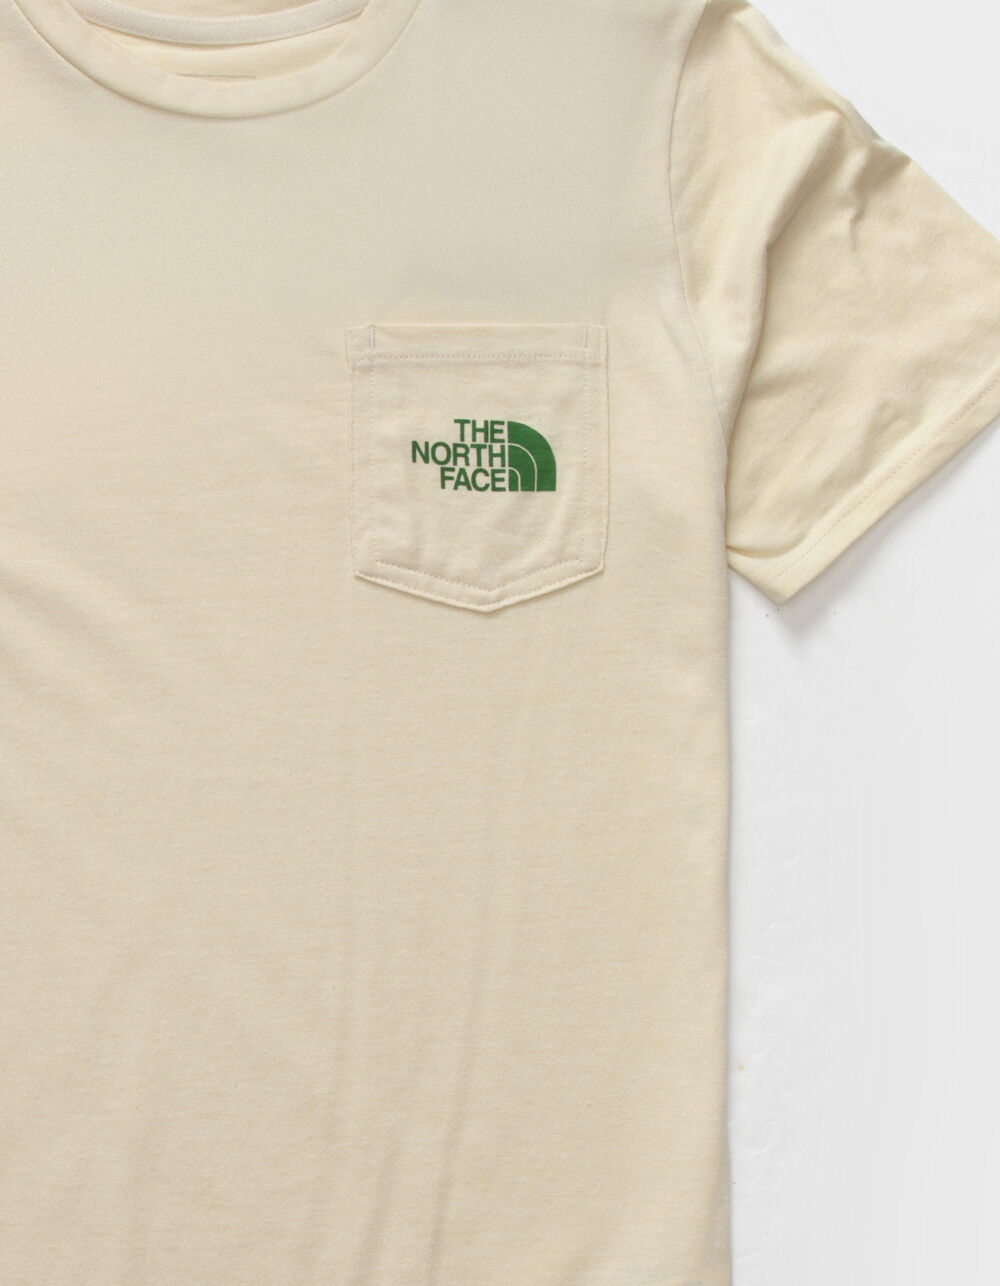 THE NORTH FACE Never Stop Exploring Boys Pocket T-Shirt - OFF WHITE ...